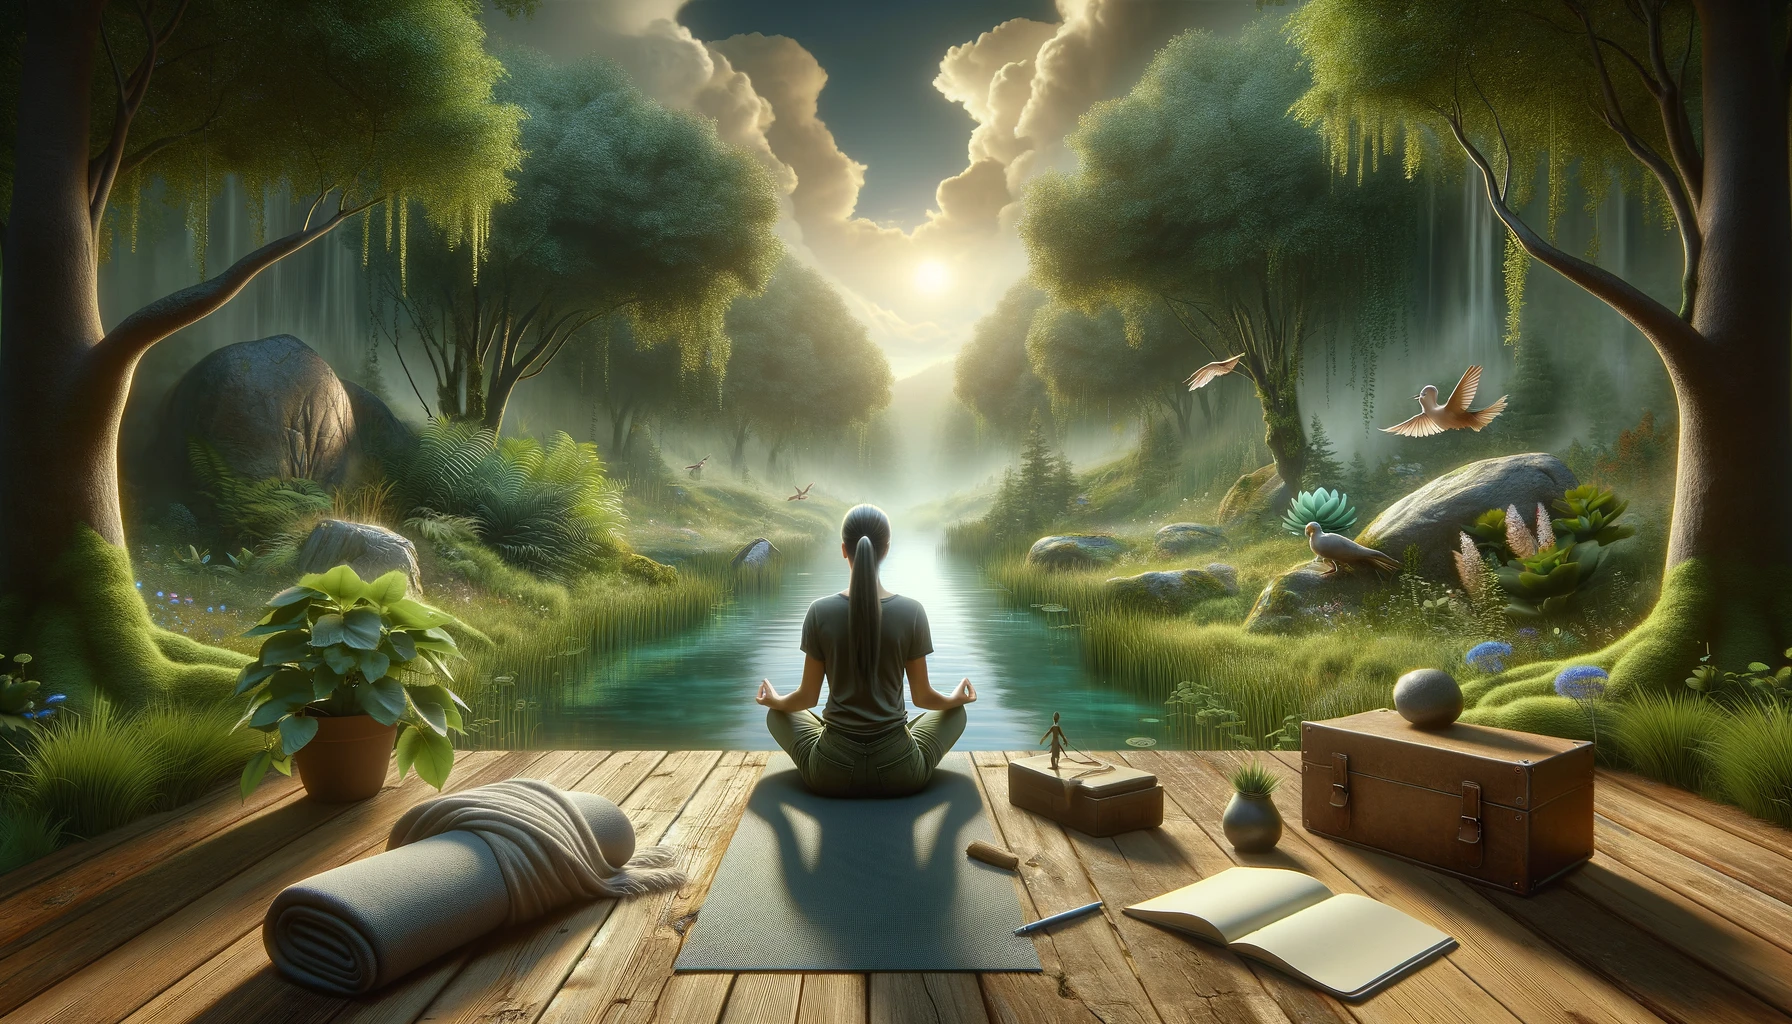 Captivating scene with an individual in a meditative pose surrounded by nature, engaging in deep breathing exercises for mental and emotional resilience, with symbolic elements like a calm body of water, lush greenery, a clear sky, and emotional support tools like journals, a comforting blanket, and a therapy dog, illustrating the importance of serenity, mindfulness, and emotional support in overall resilience